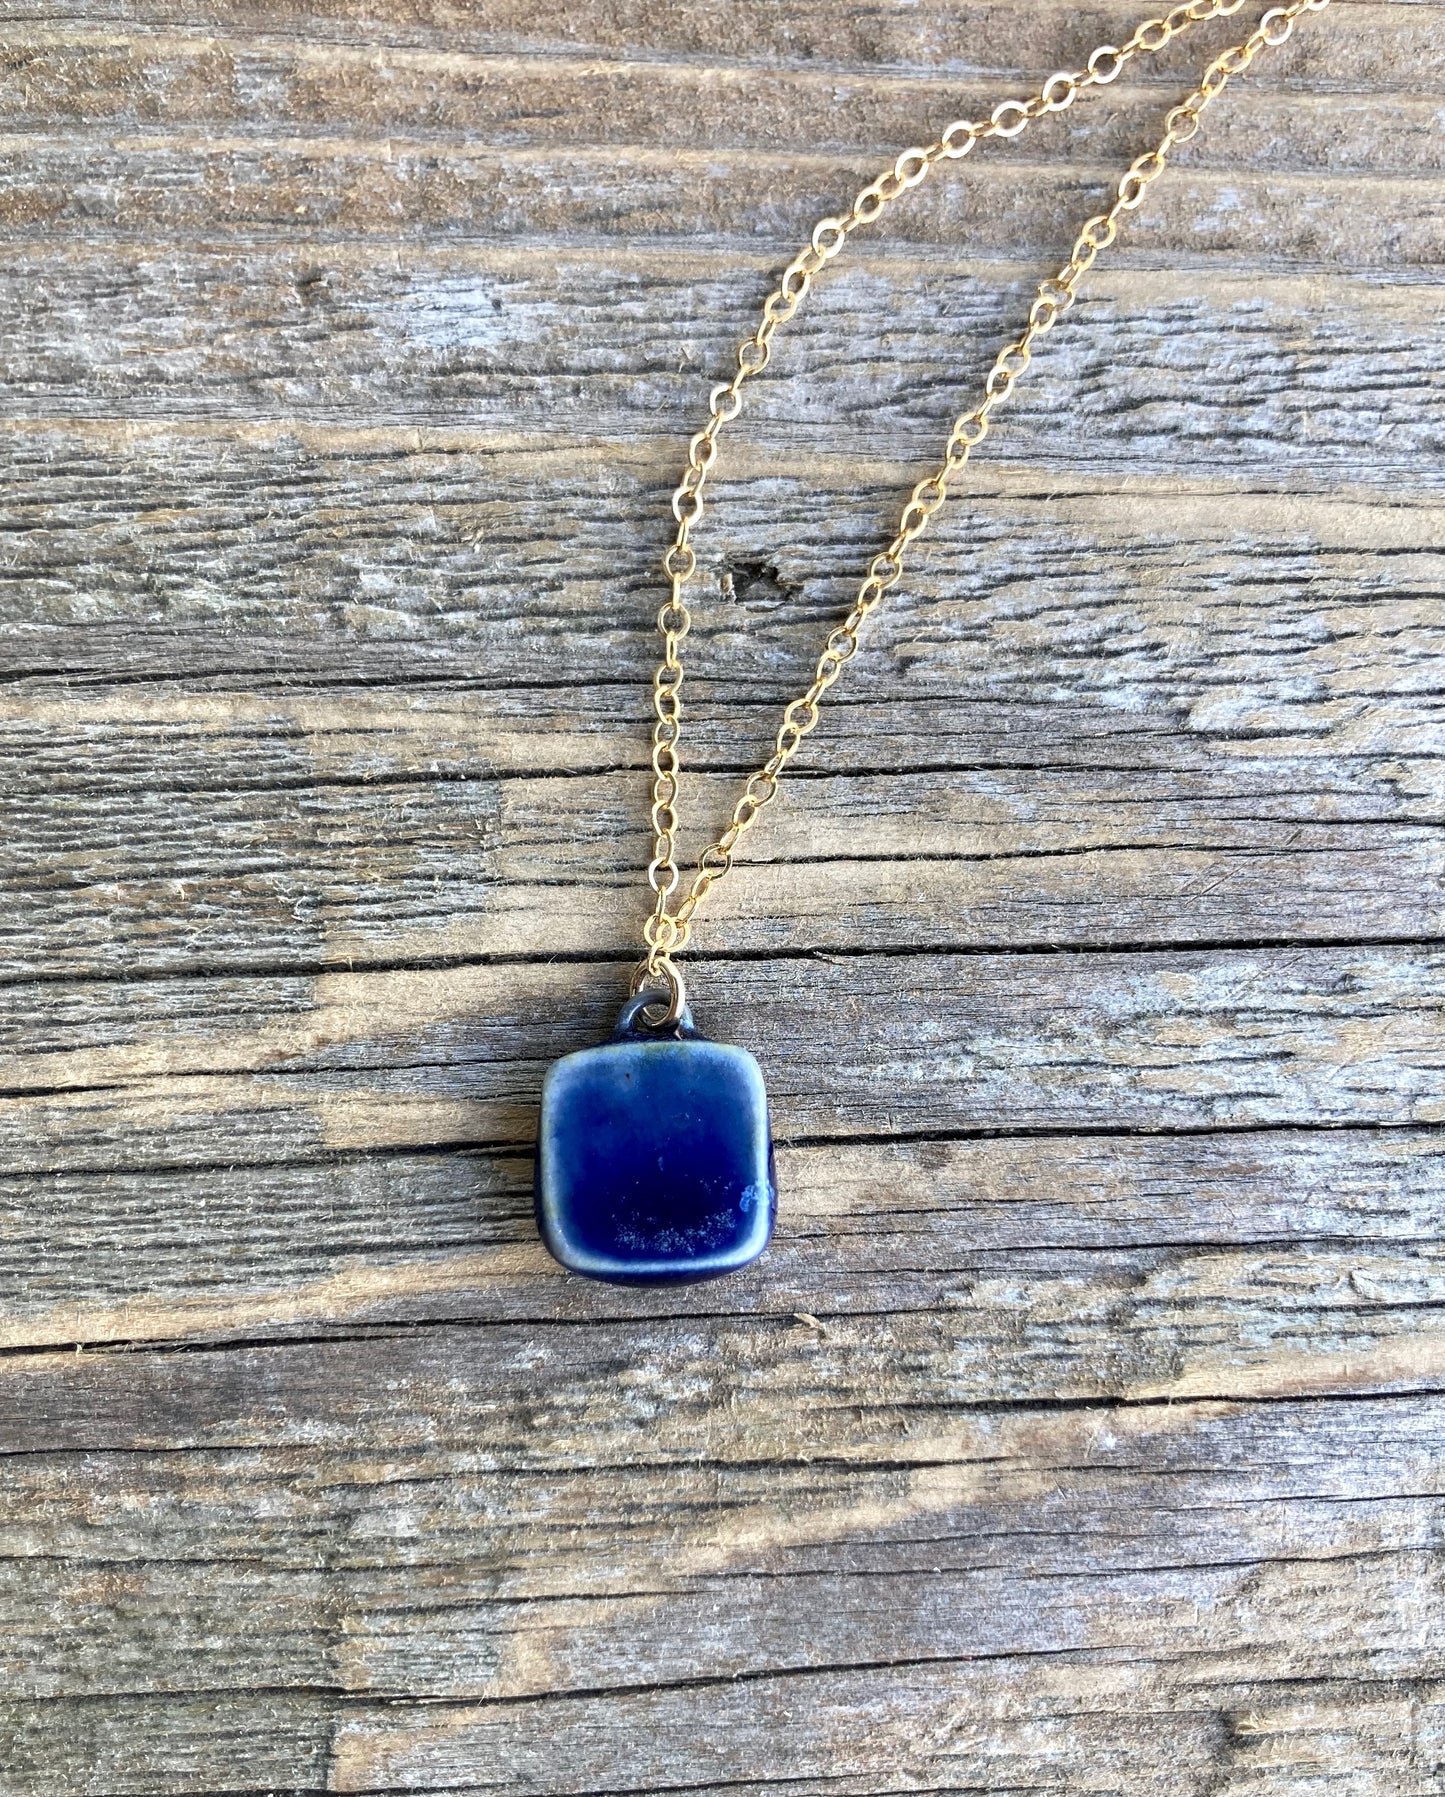 Square Cobalt Necklace, gold-filled chain